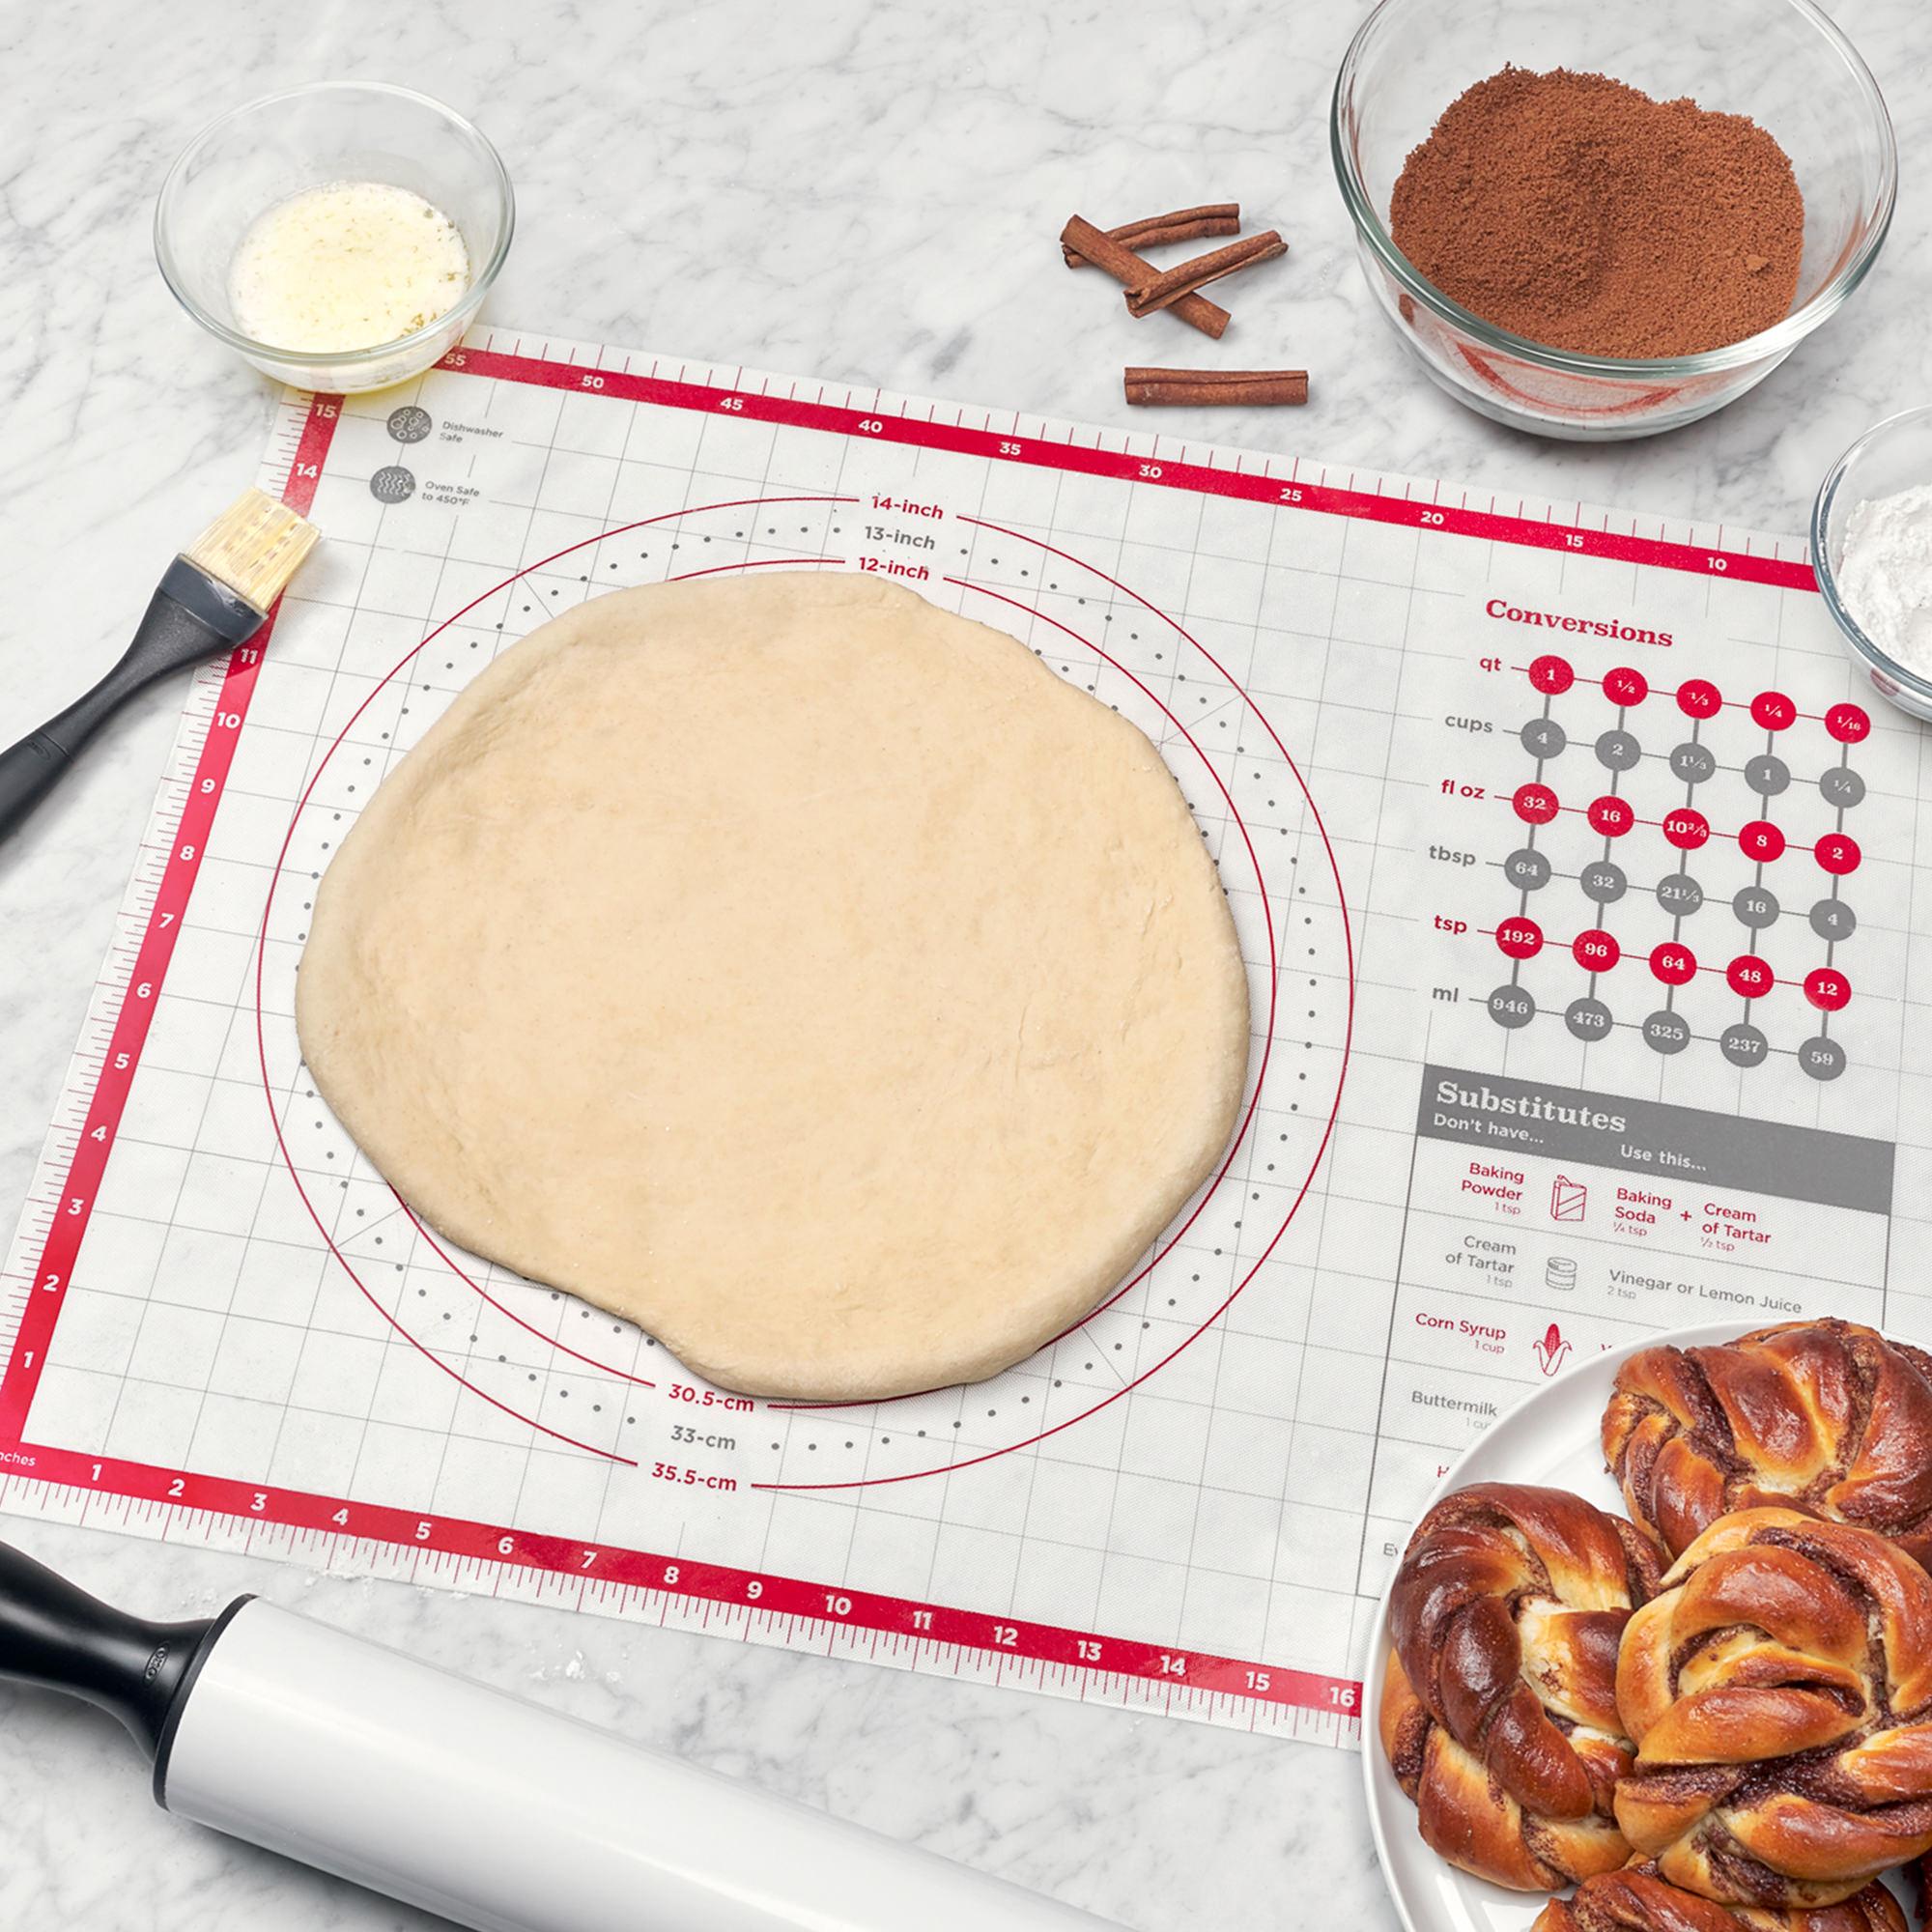 OXO Good Grips Silicone Pastry Mat 59x40cm Image 3